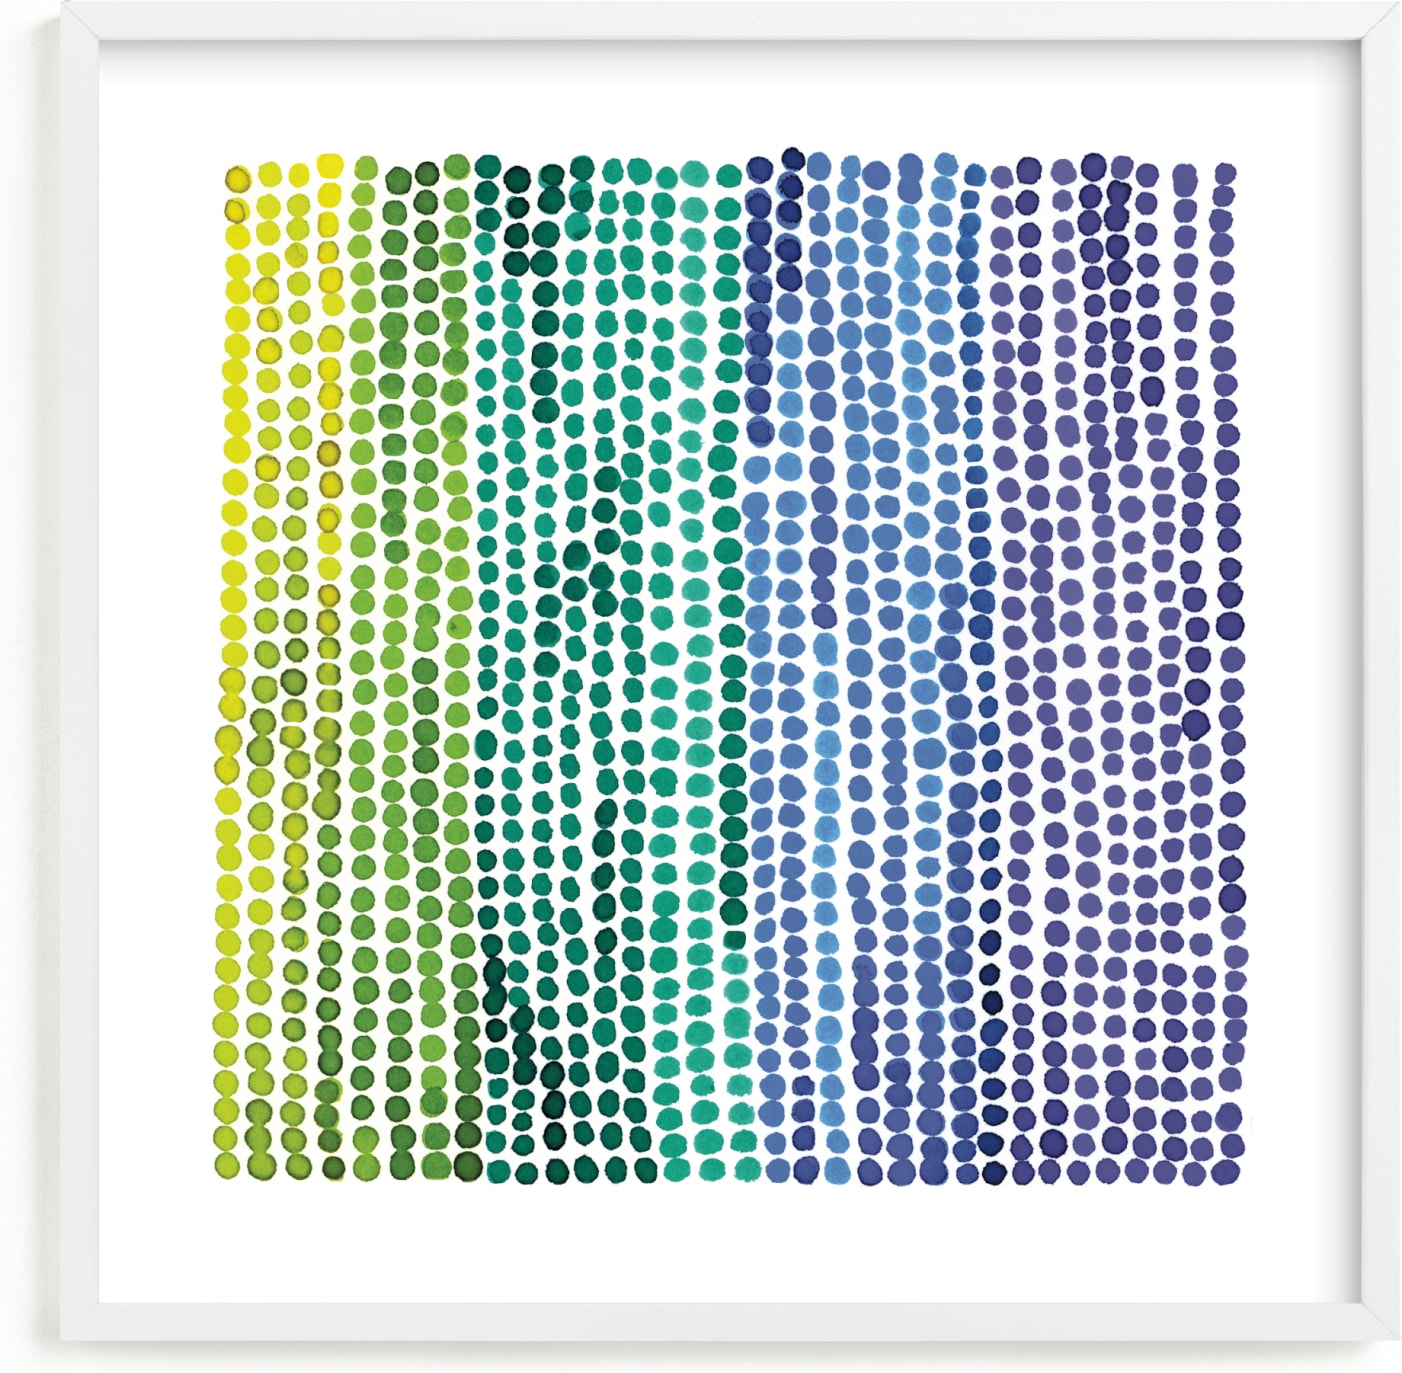 This is a blue, purple, green kids wall art by Kerry Doyle called Rainbow Dots 2.